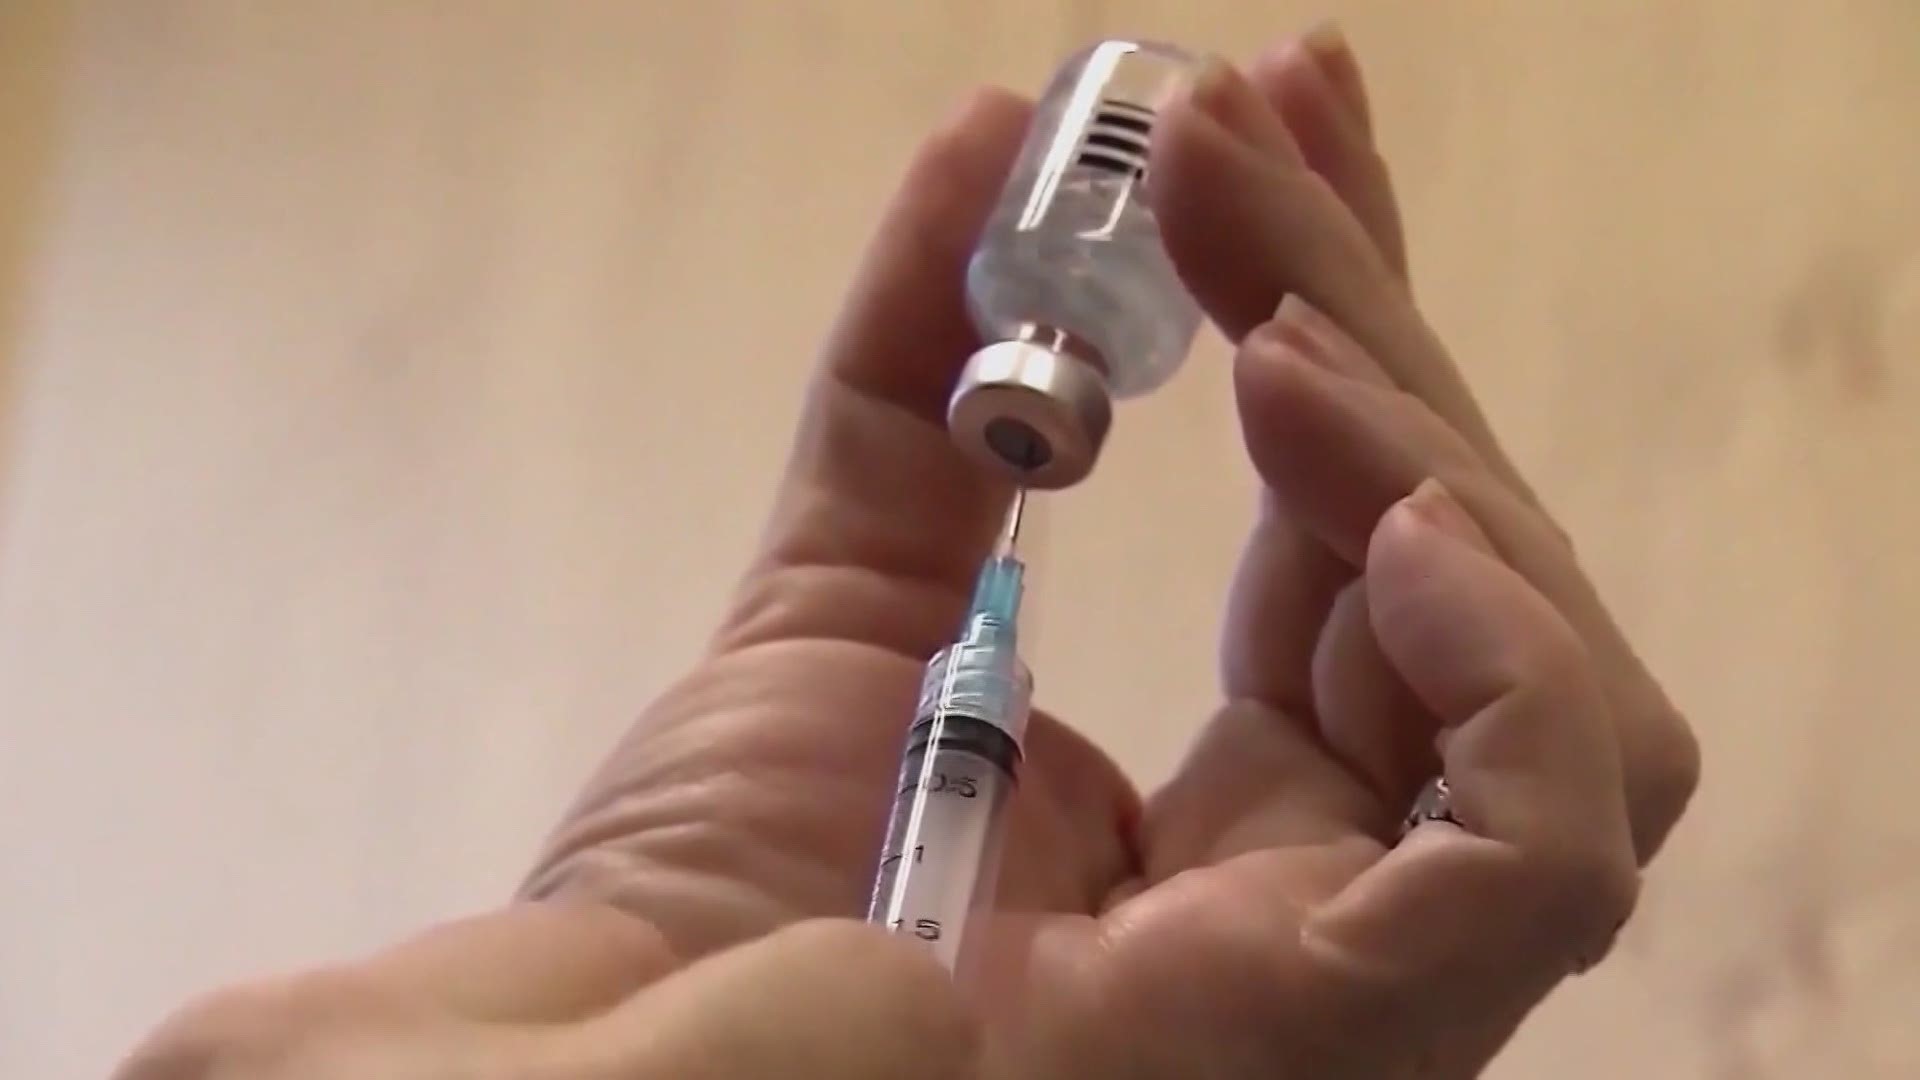 Louisiana health officials are concerned that herd immunity may not be reached due to vaccine hesitancy.